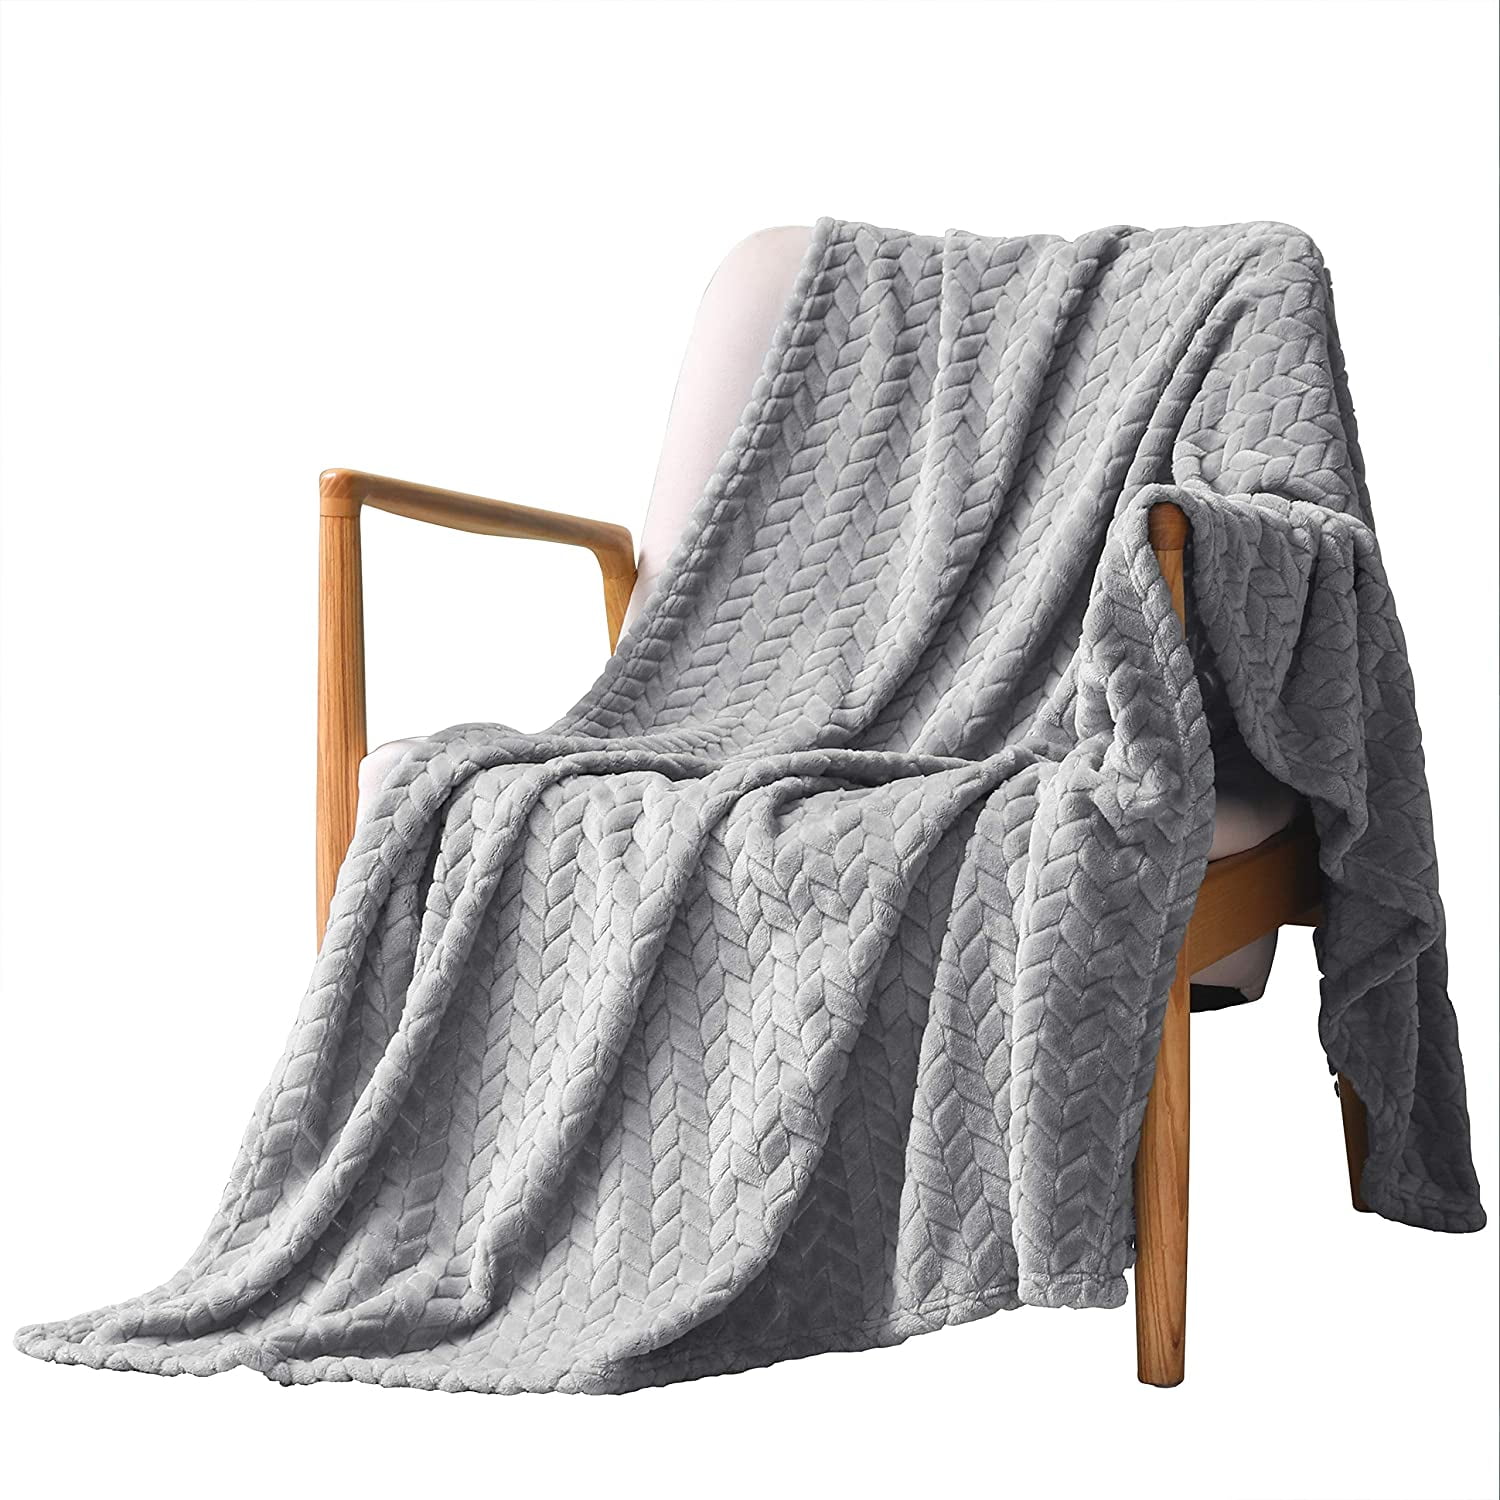 SHARK HOODED THROW Your Zone Gray Blanket 40X50 Inches With Hands NEW NWT 